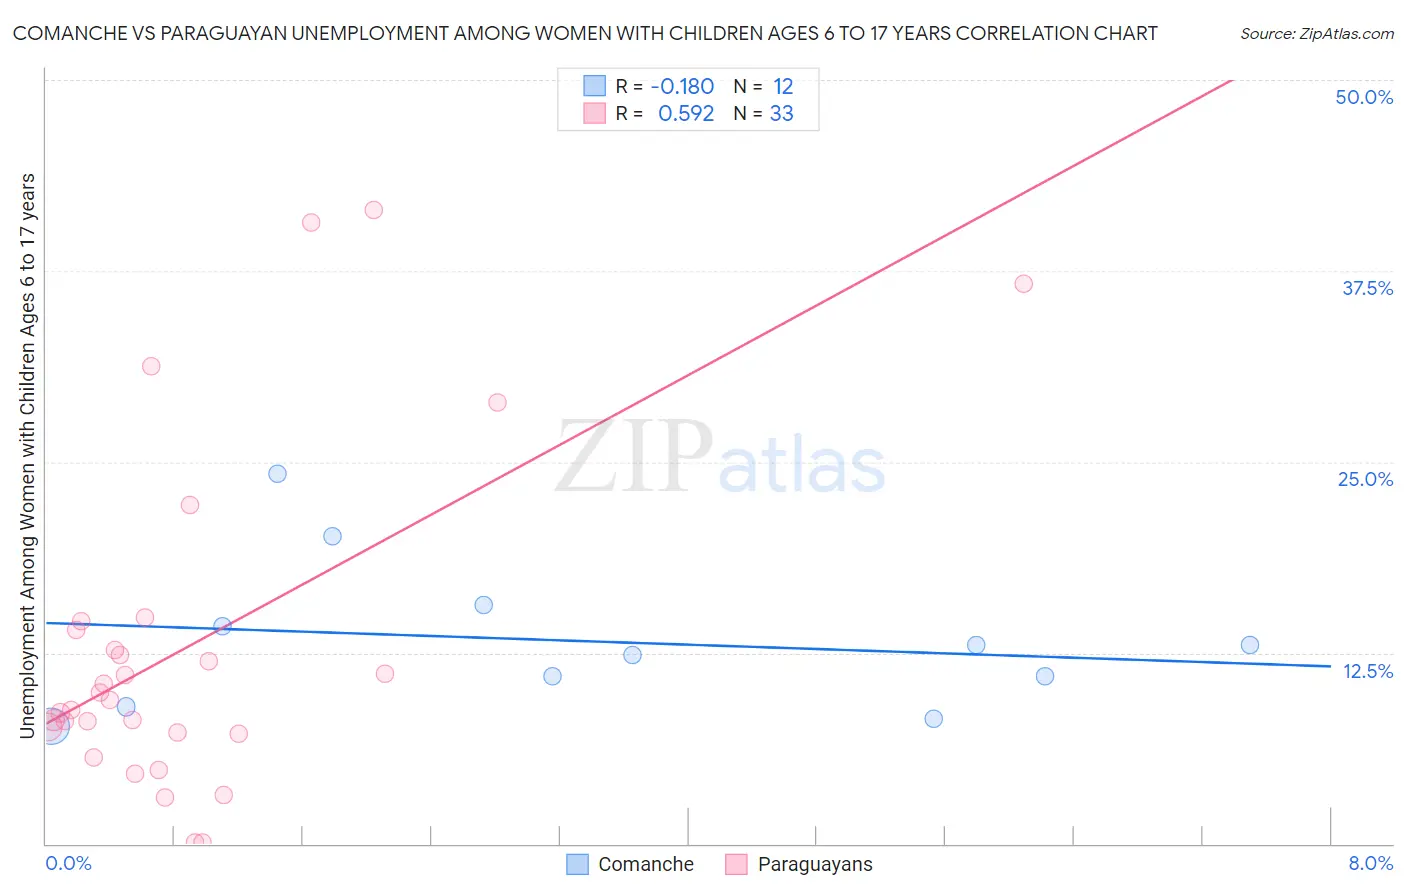 Comanche vs Paraguayan Unemployment Among Women with Children Ages 6 to 17 years